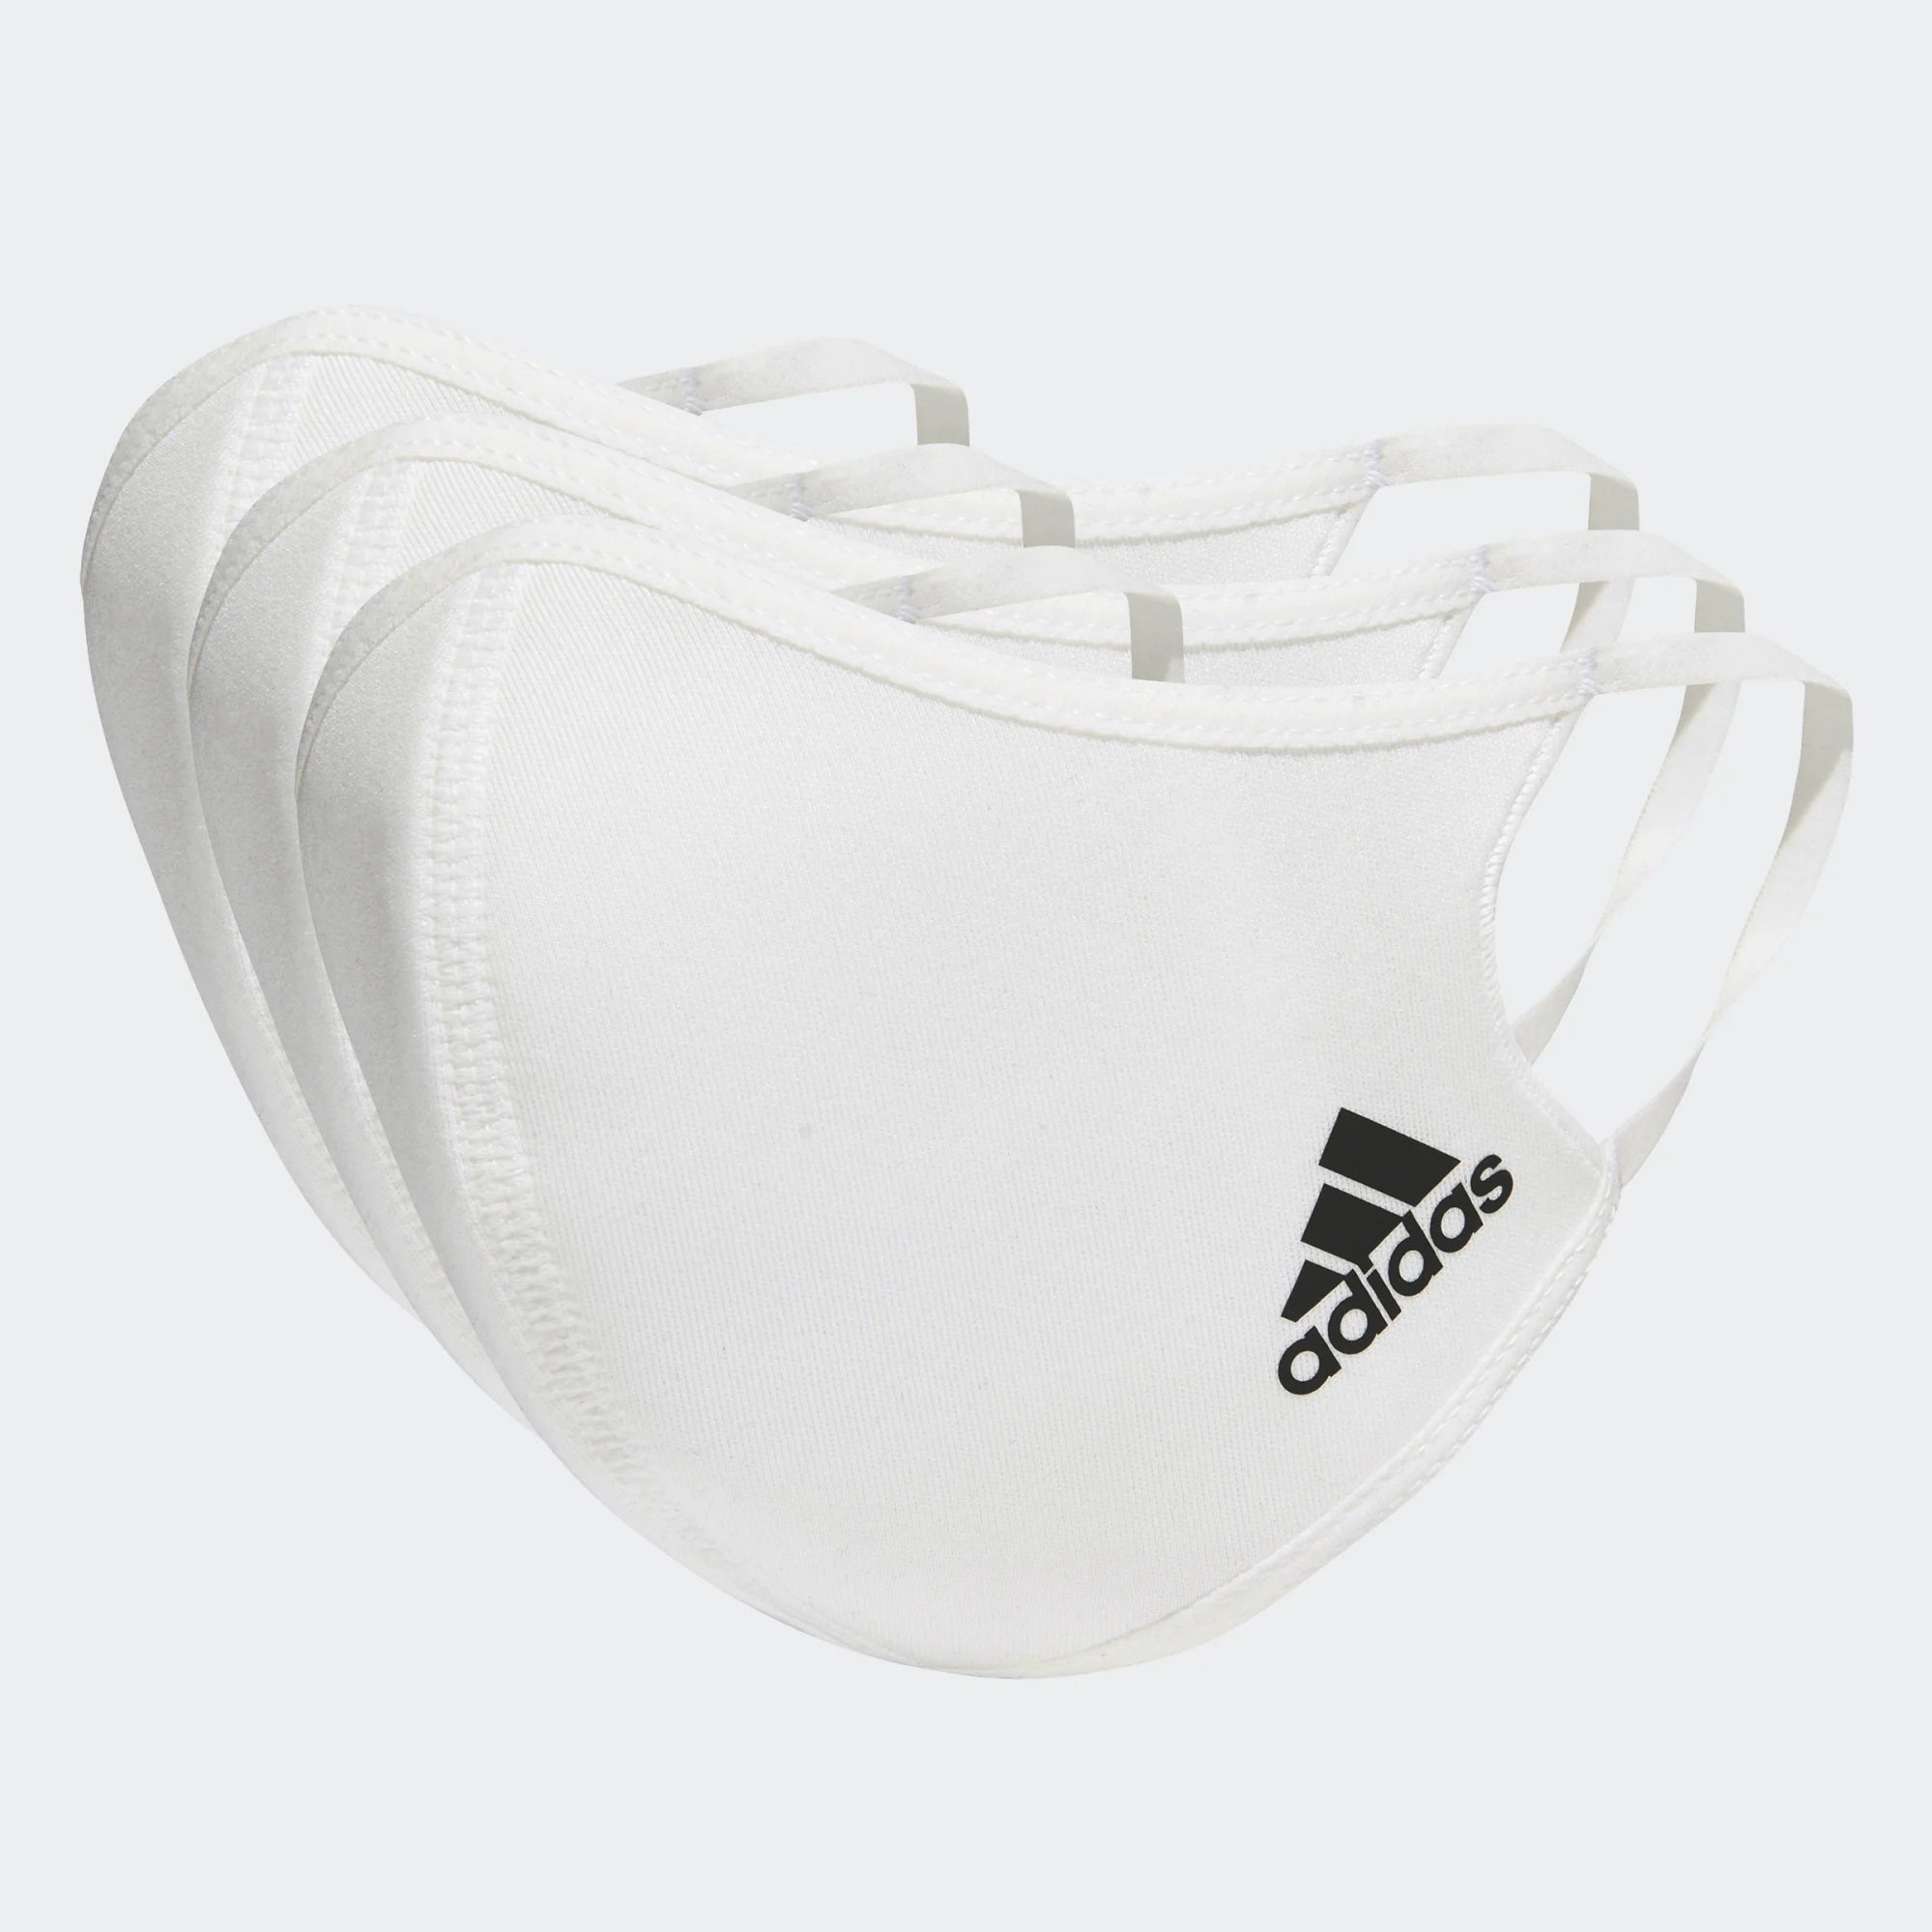 Adidas Face Covers 3pcs in Pack H34578 - Large size – Mann